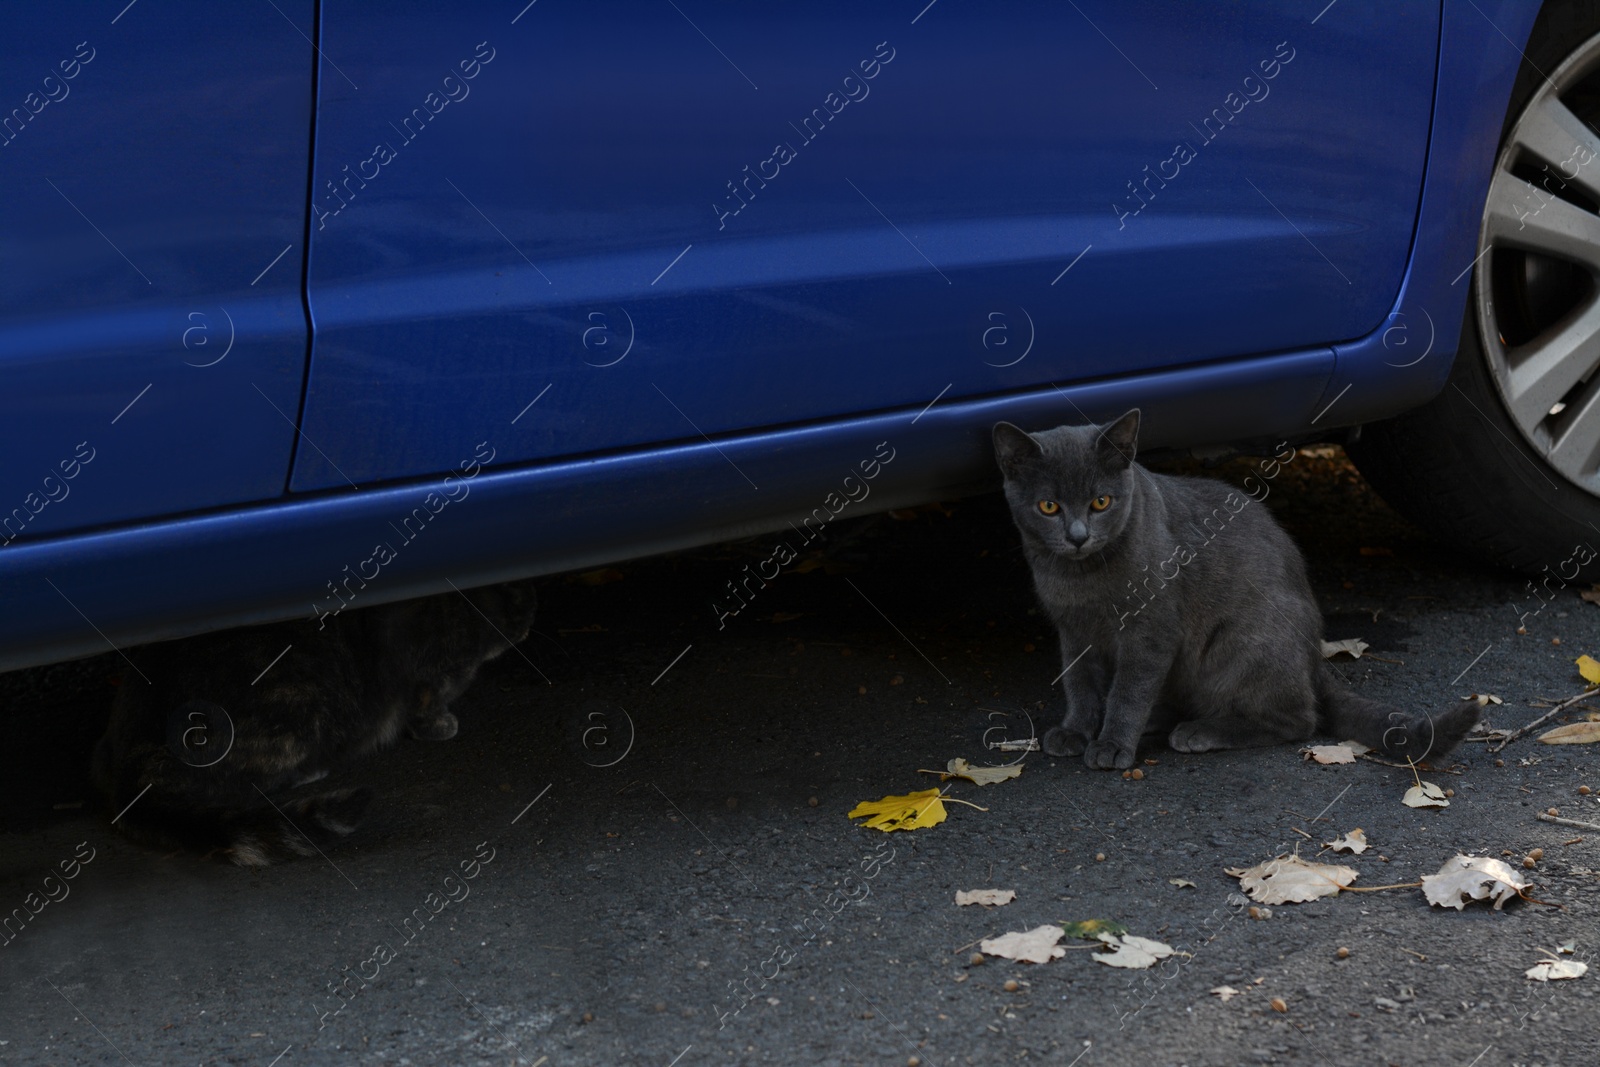 Photo of Lonely stray cat outdoors on asphalt near blue car. Homeless pet